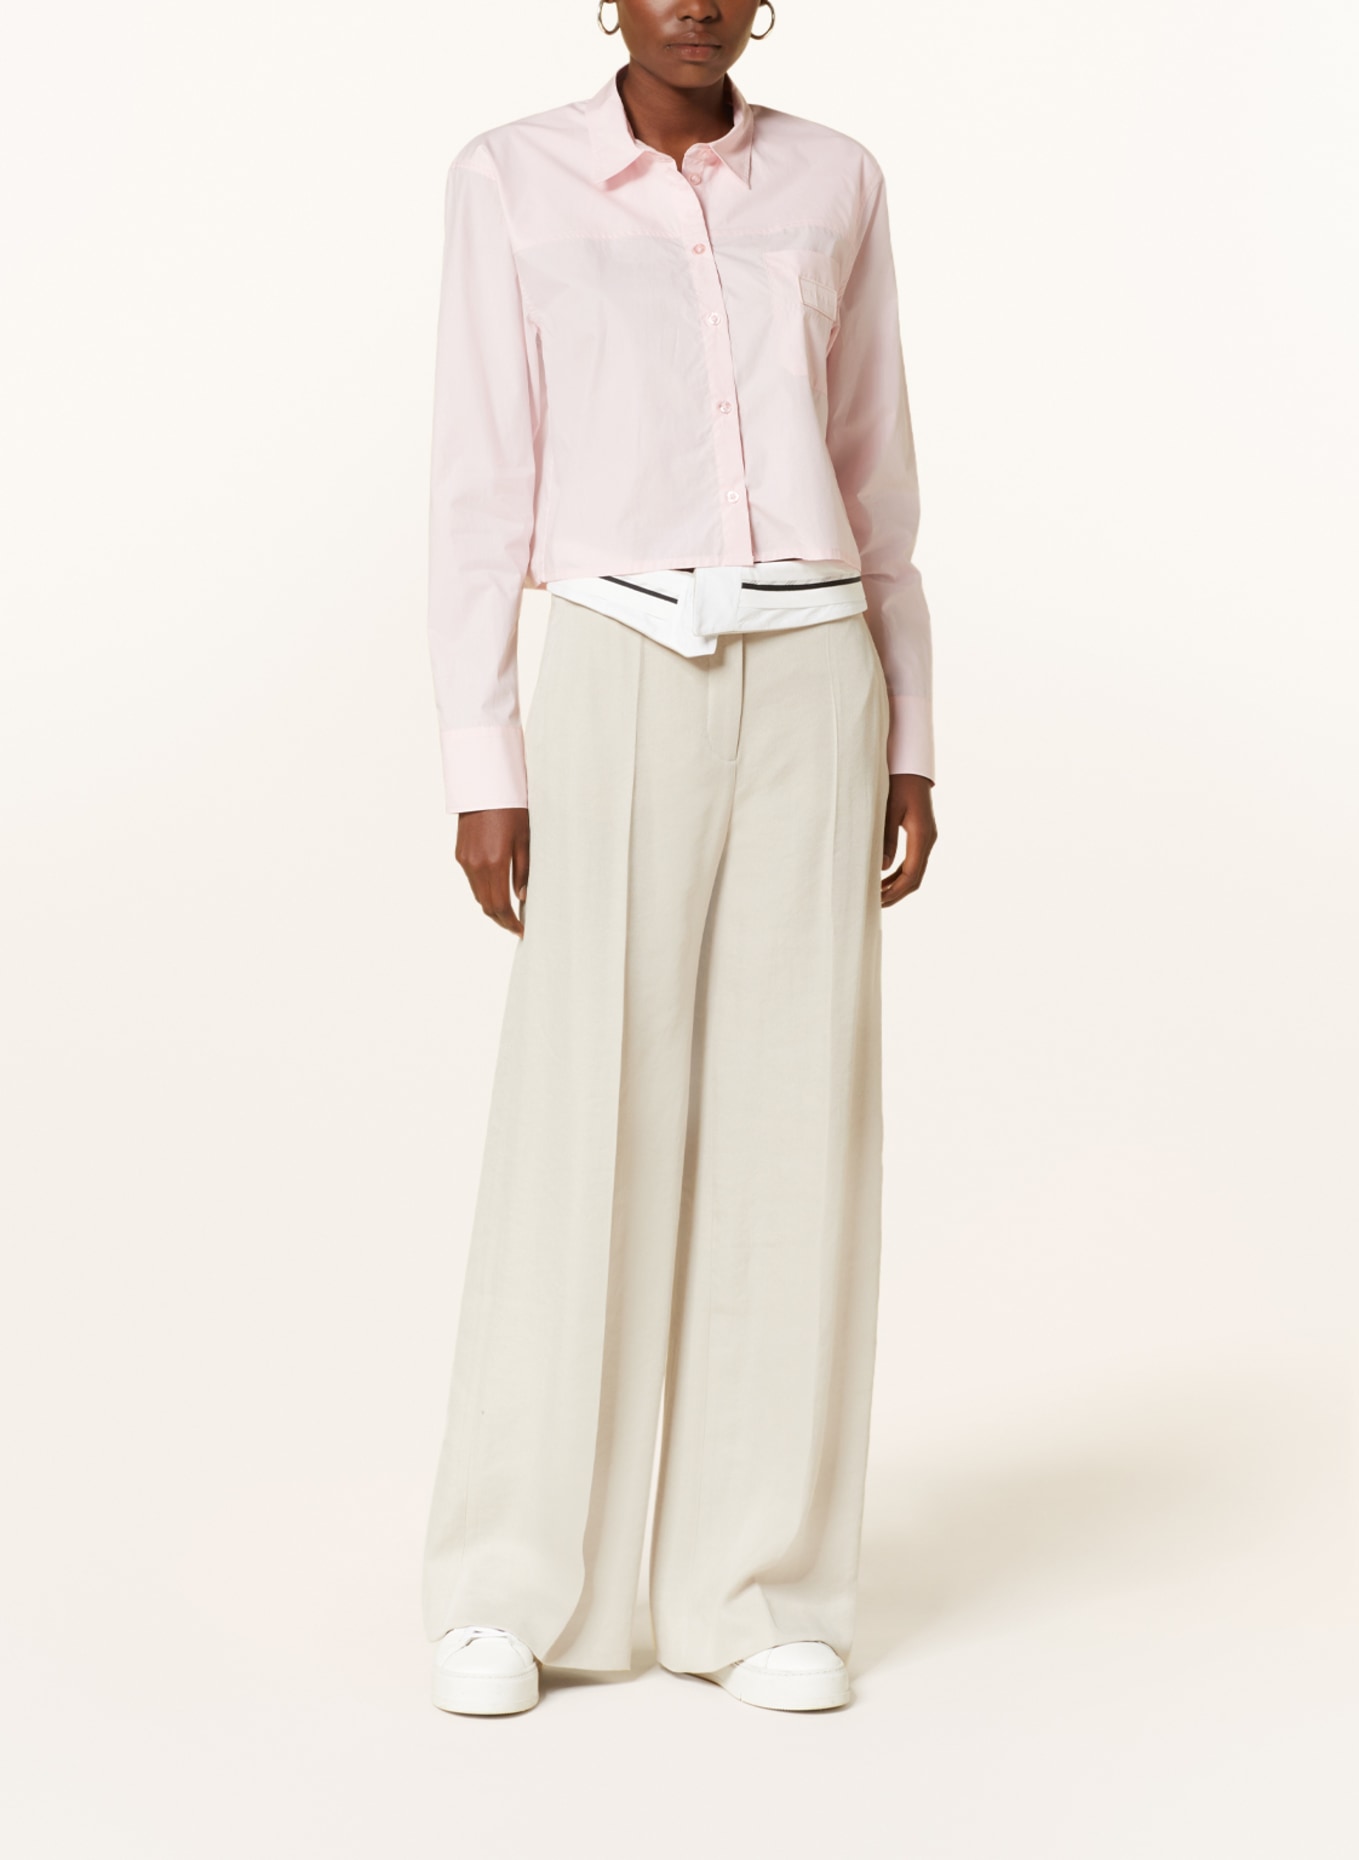 REMAIN Cropped shirt blouse, Color: PINK (Image 2)